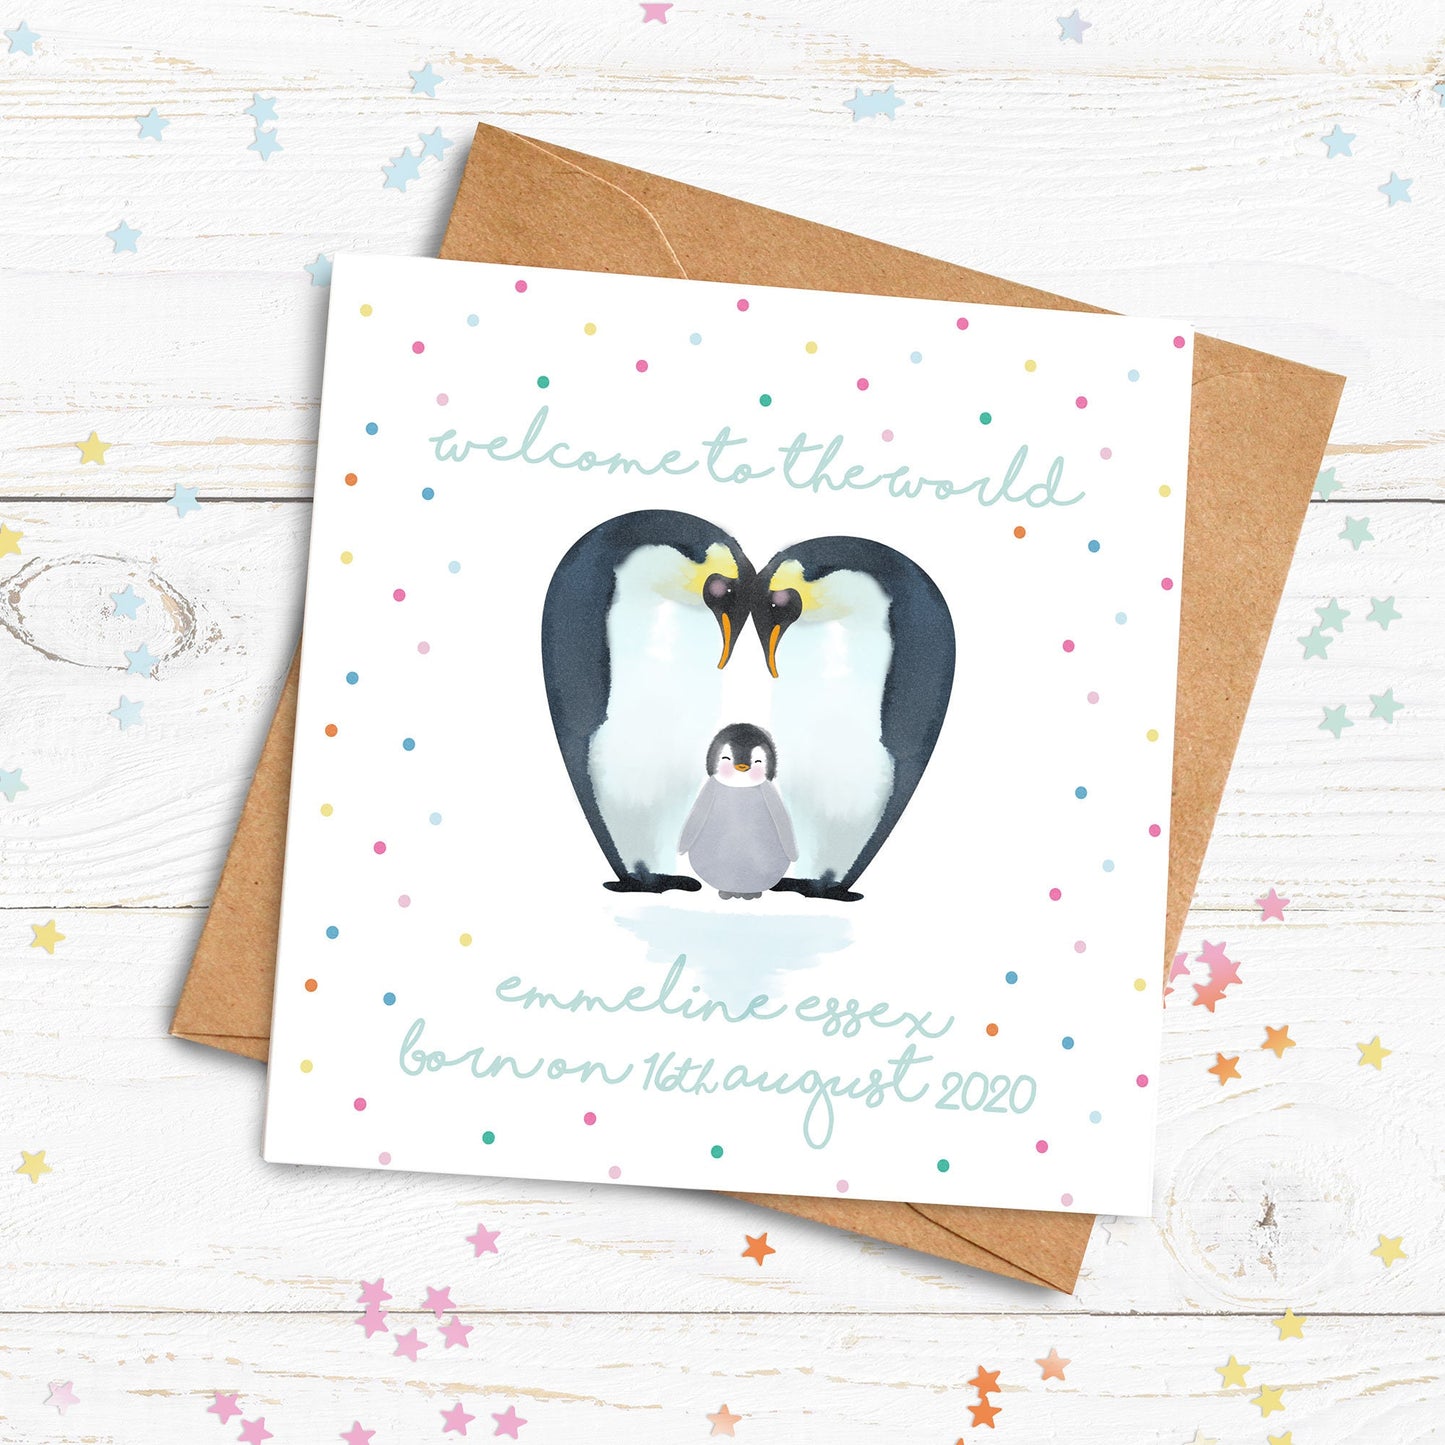 Welcome to the World Penguin Card. Personalised New Baby Card. Cute Penguin Card. Send Direct Option.